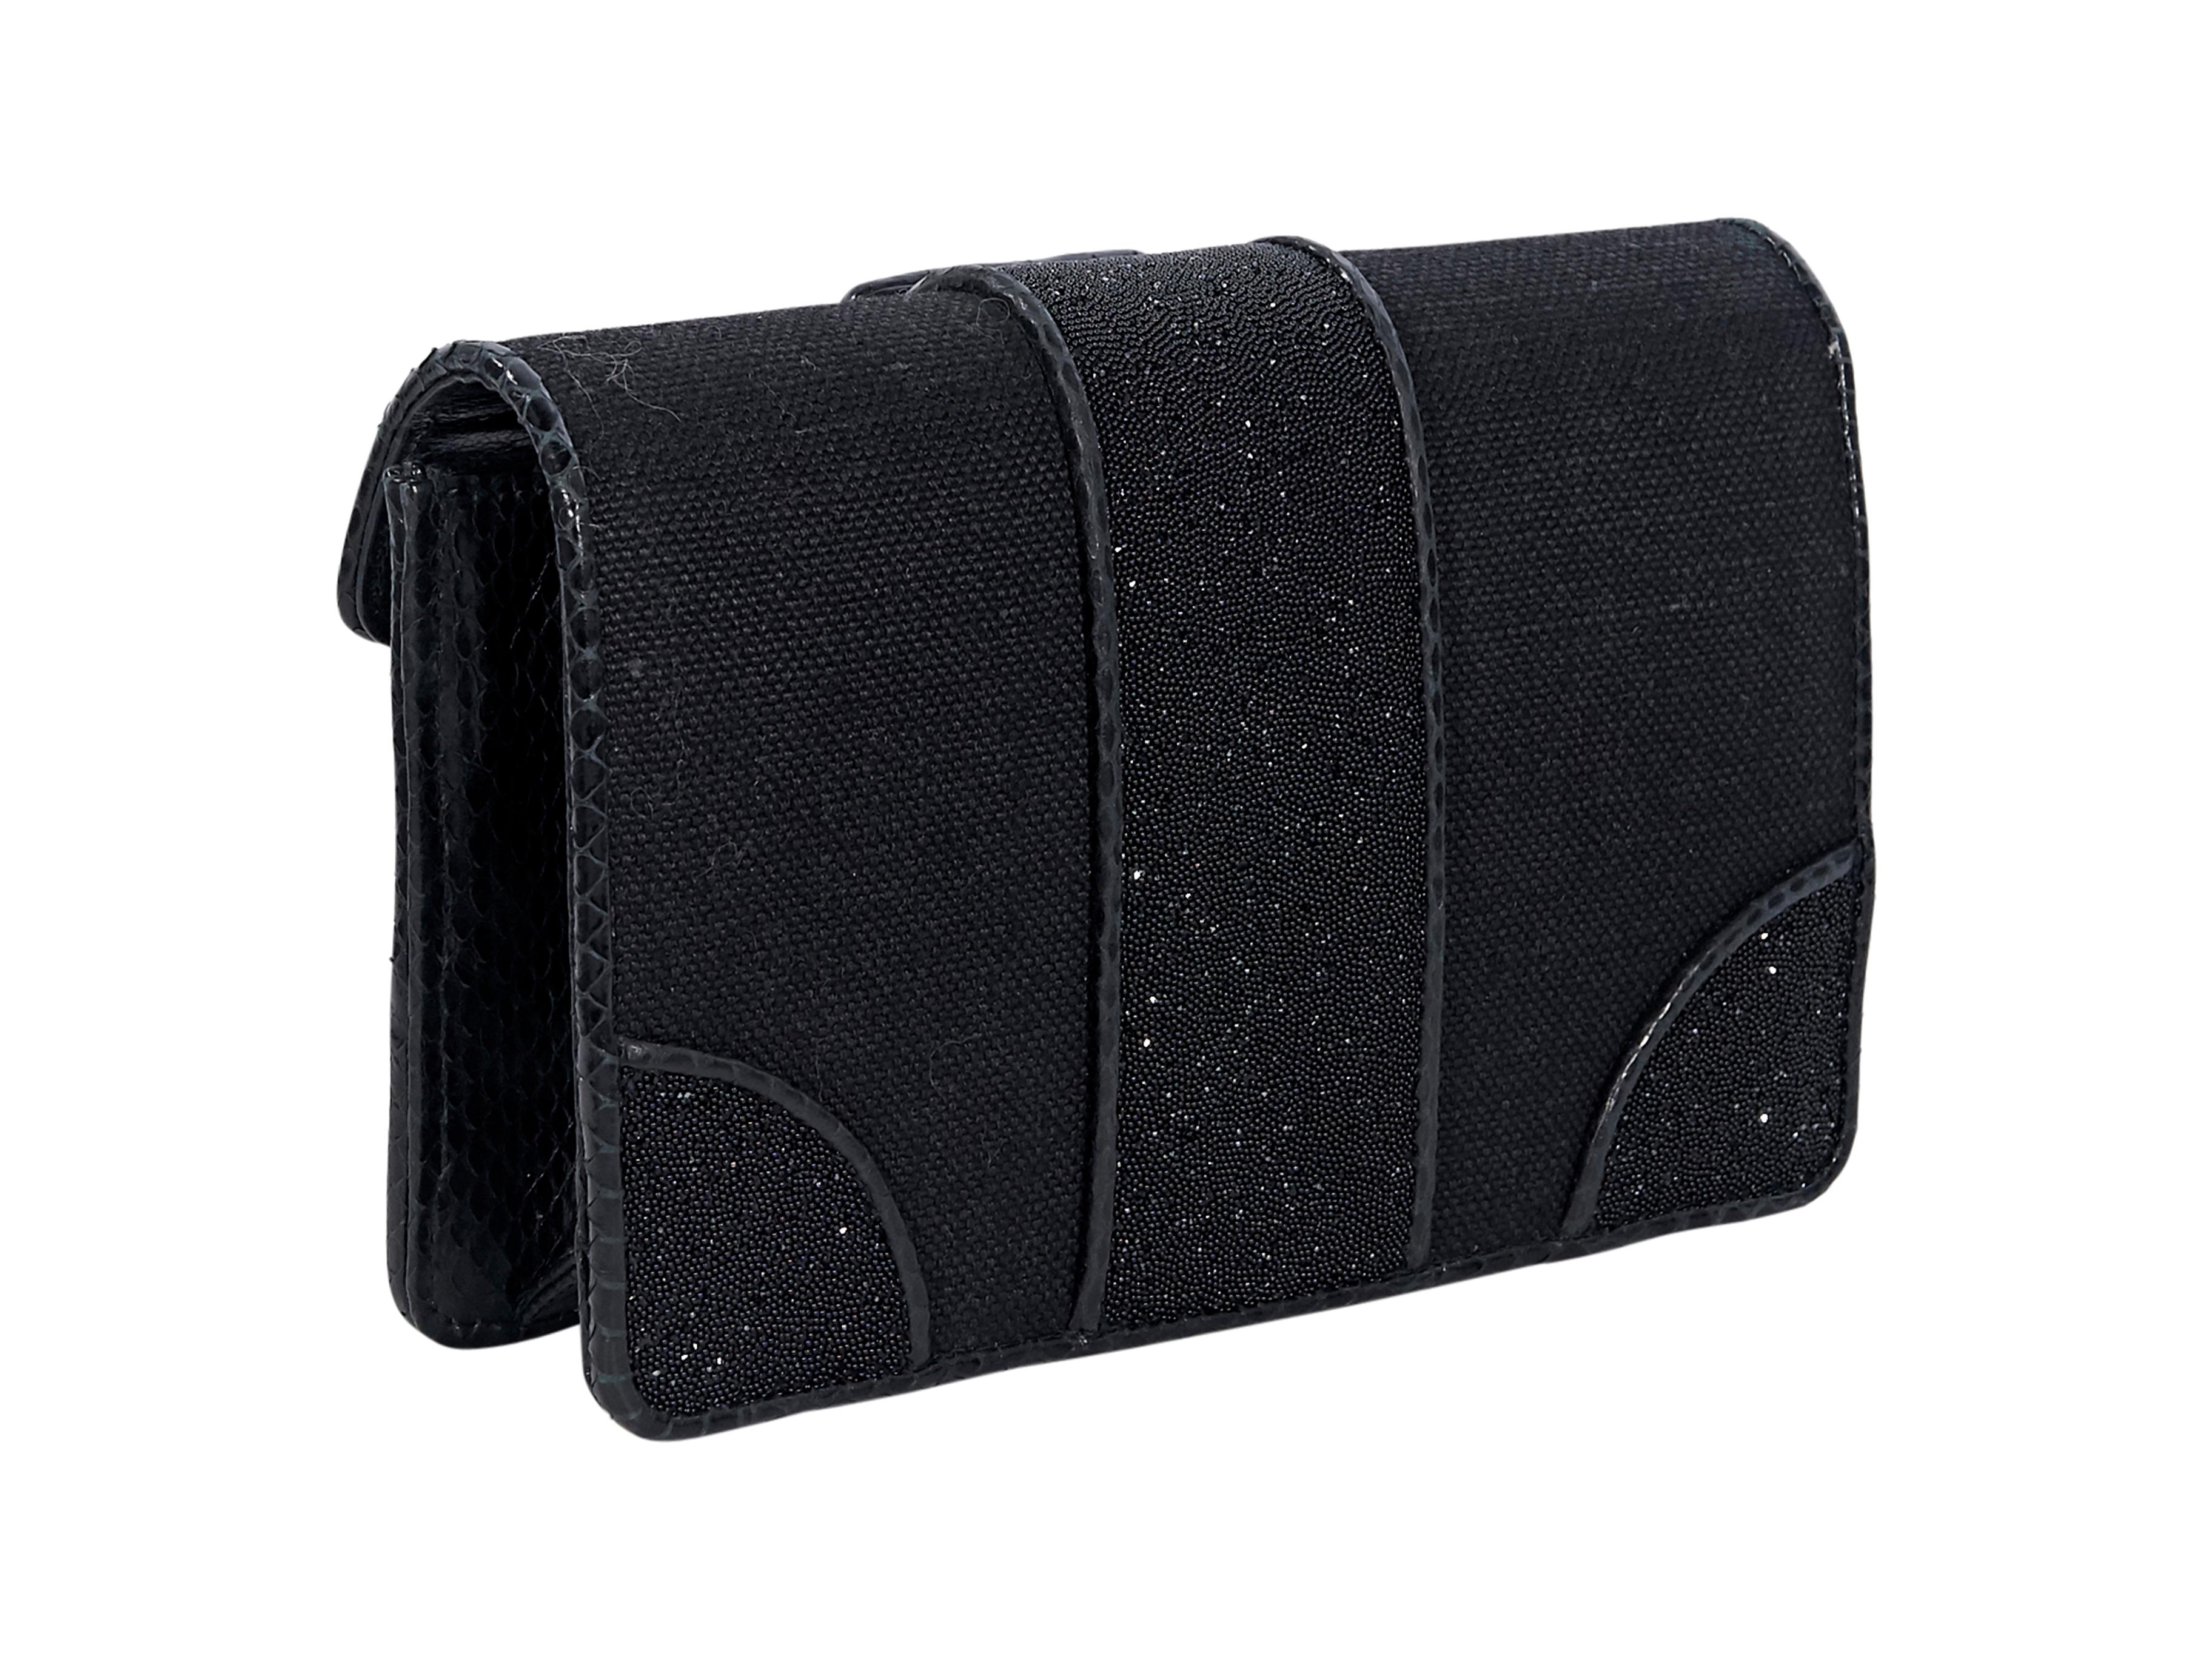 Product details:  Black patterned snakeskin-trimmed crystal-embellished canvas clutch by Bottega Veneta.  Trimmed with snake skin-embossed leather.  Front flap with magnetic closure.  Suede lined interior. Pair yours with a leather mini dress. 7.5